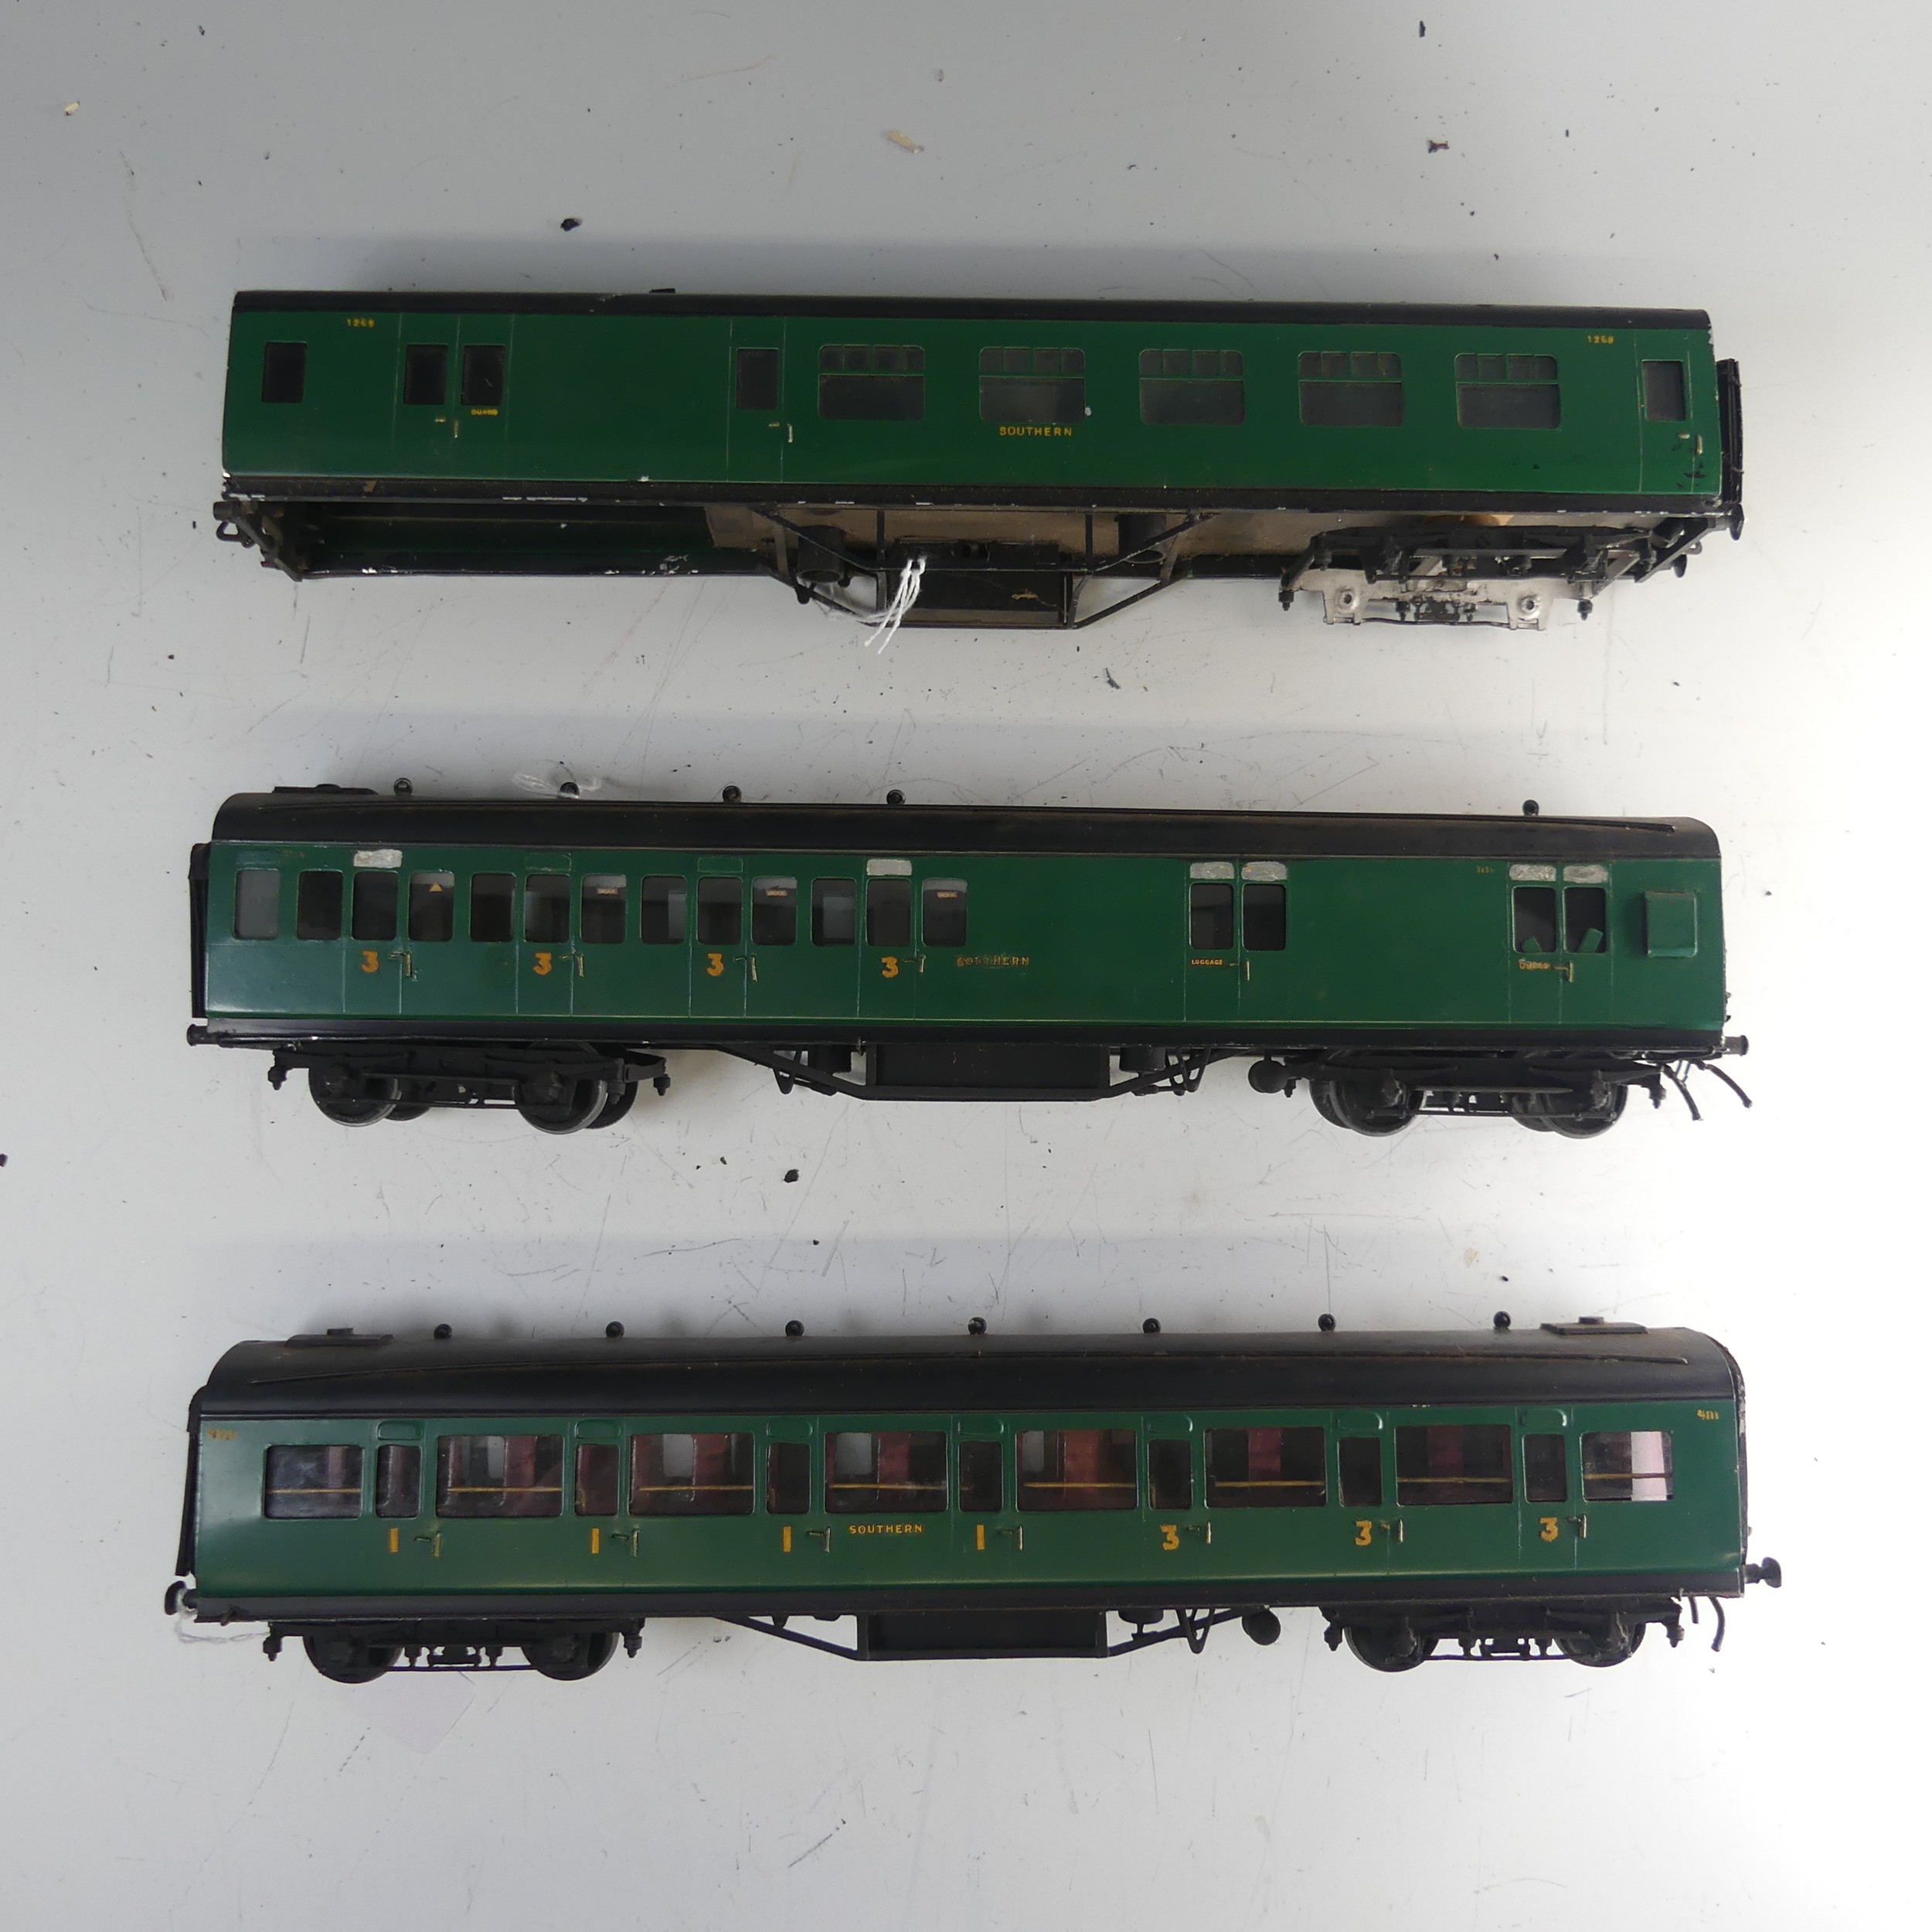 Two Exley ‘0’ gauge SR Coaches, green with yellow lettering, repainted, together with two Exley '